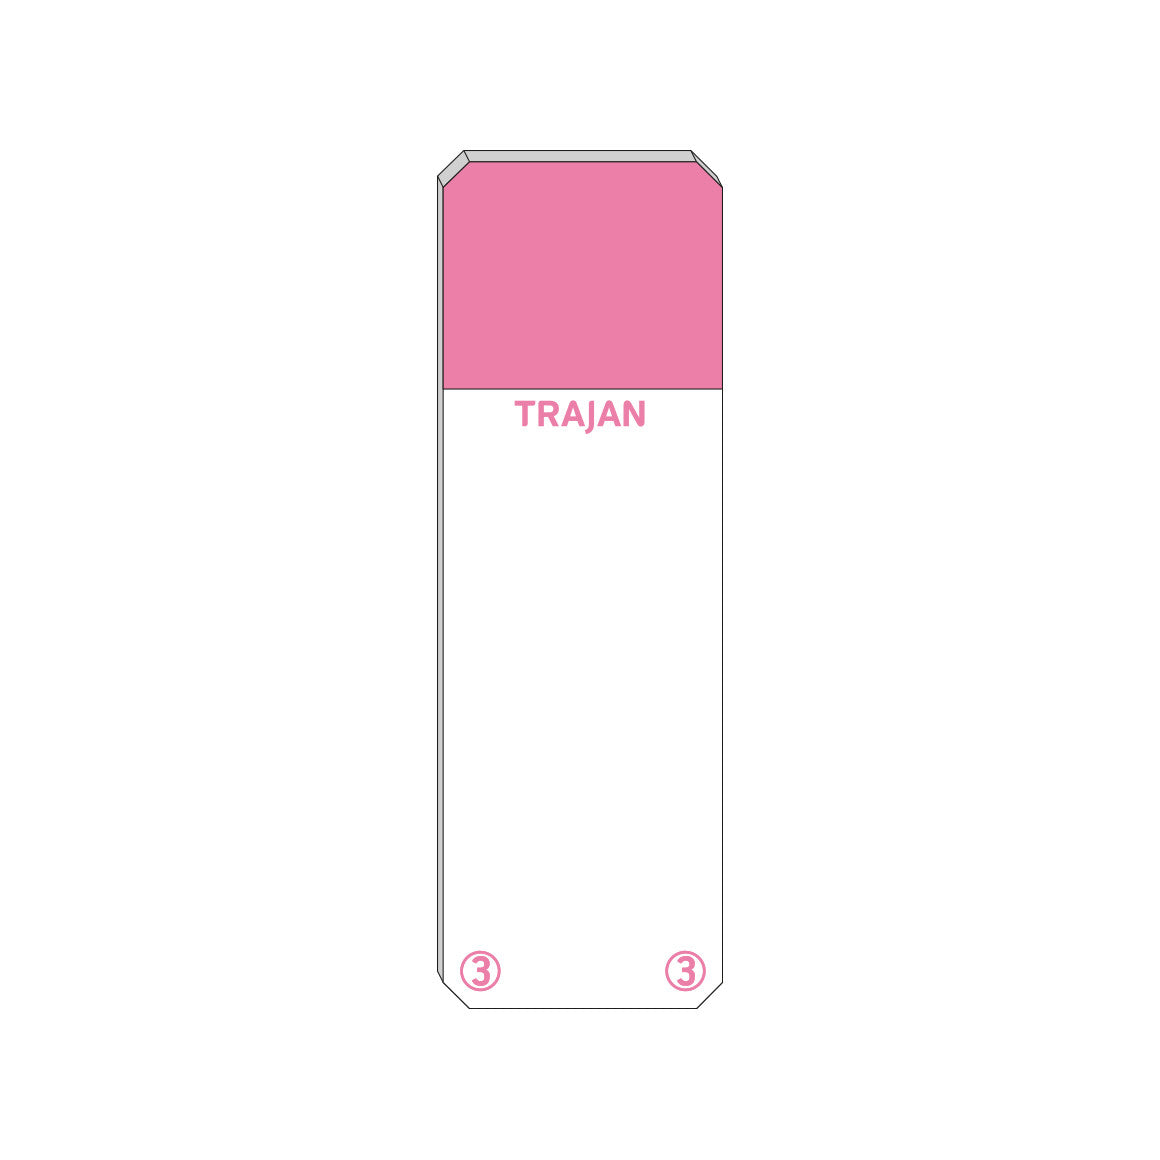 Trajan Scientific and Medical, Series 3 Adhesive Microscope Slides, Pink, Frost 20 mm, 76 mm x 26 mm